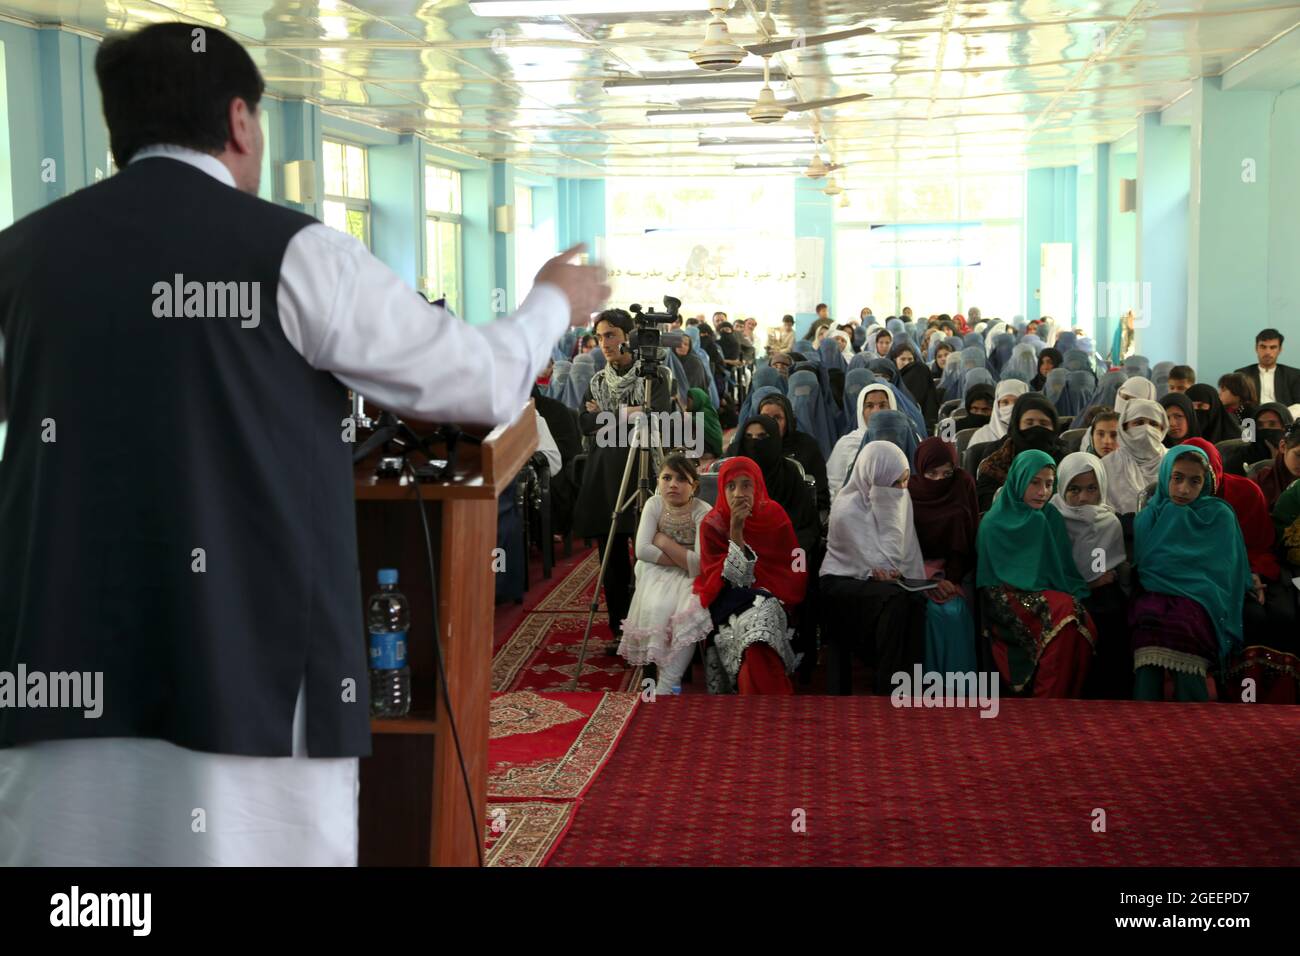 Khost Provincial Governor Abdul Jabar Naeemi offers the support of his office for issues concerning women's rights during a meeting for International Women's Day at the Khost Provincial Headquarters in Khost city, Khost province, Afghanistan, March 9, 2013. The meeting was one of the largest gatherings of women to ever occur in Khost province. They discussed a woman's strength and responsibility in her household as well as higher education for all women and girls. (U.S. Army photo by Sgt. Kimberly Trumbull / Released) Stock Photo